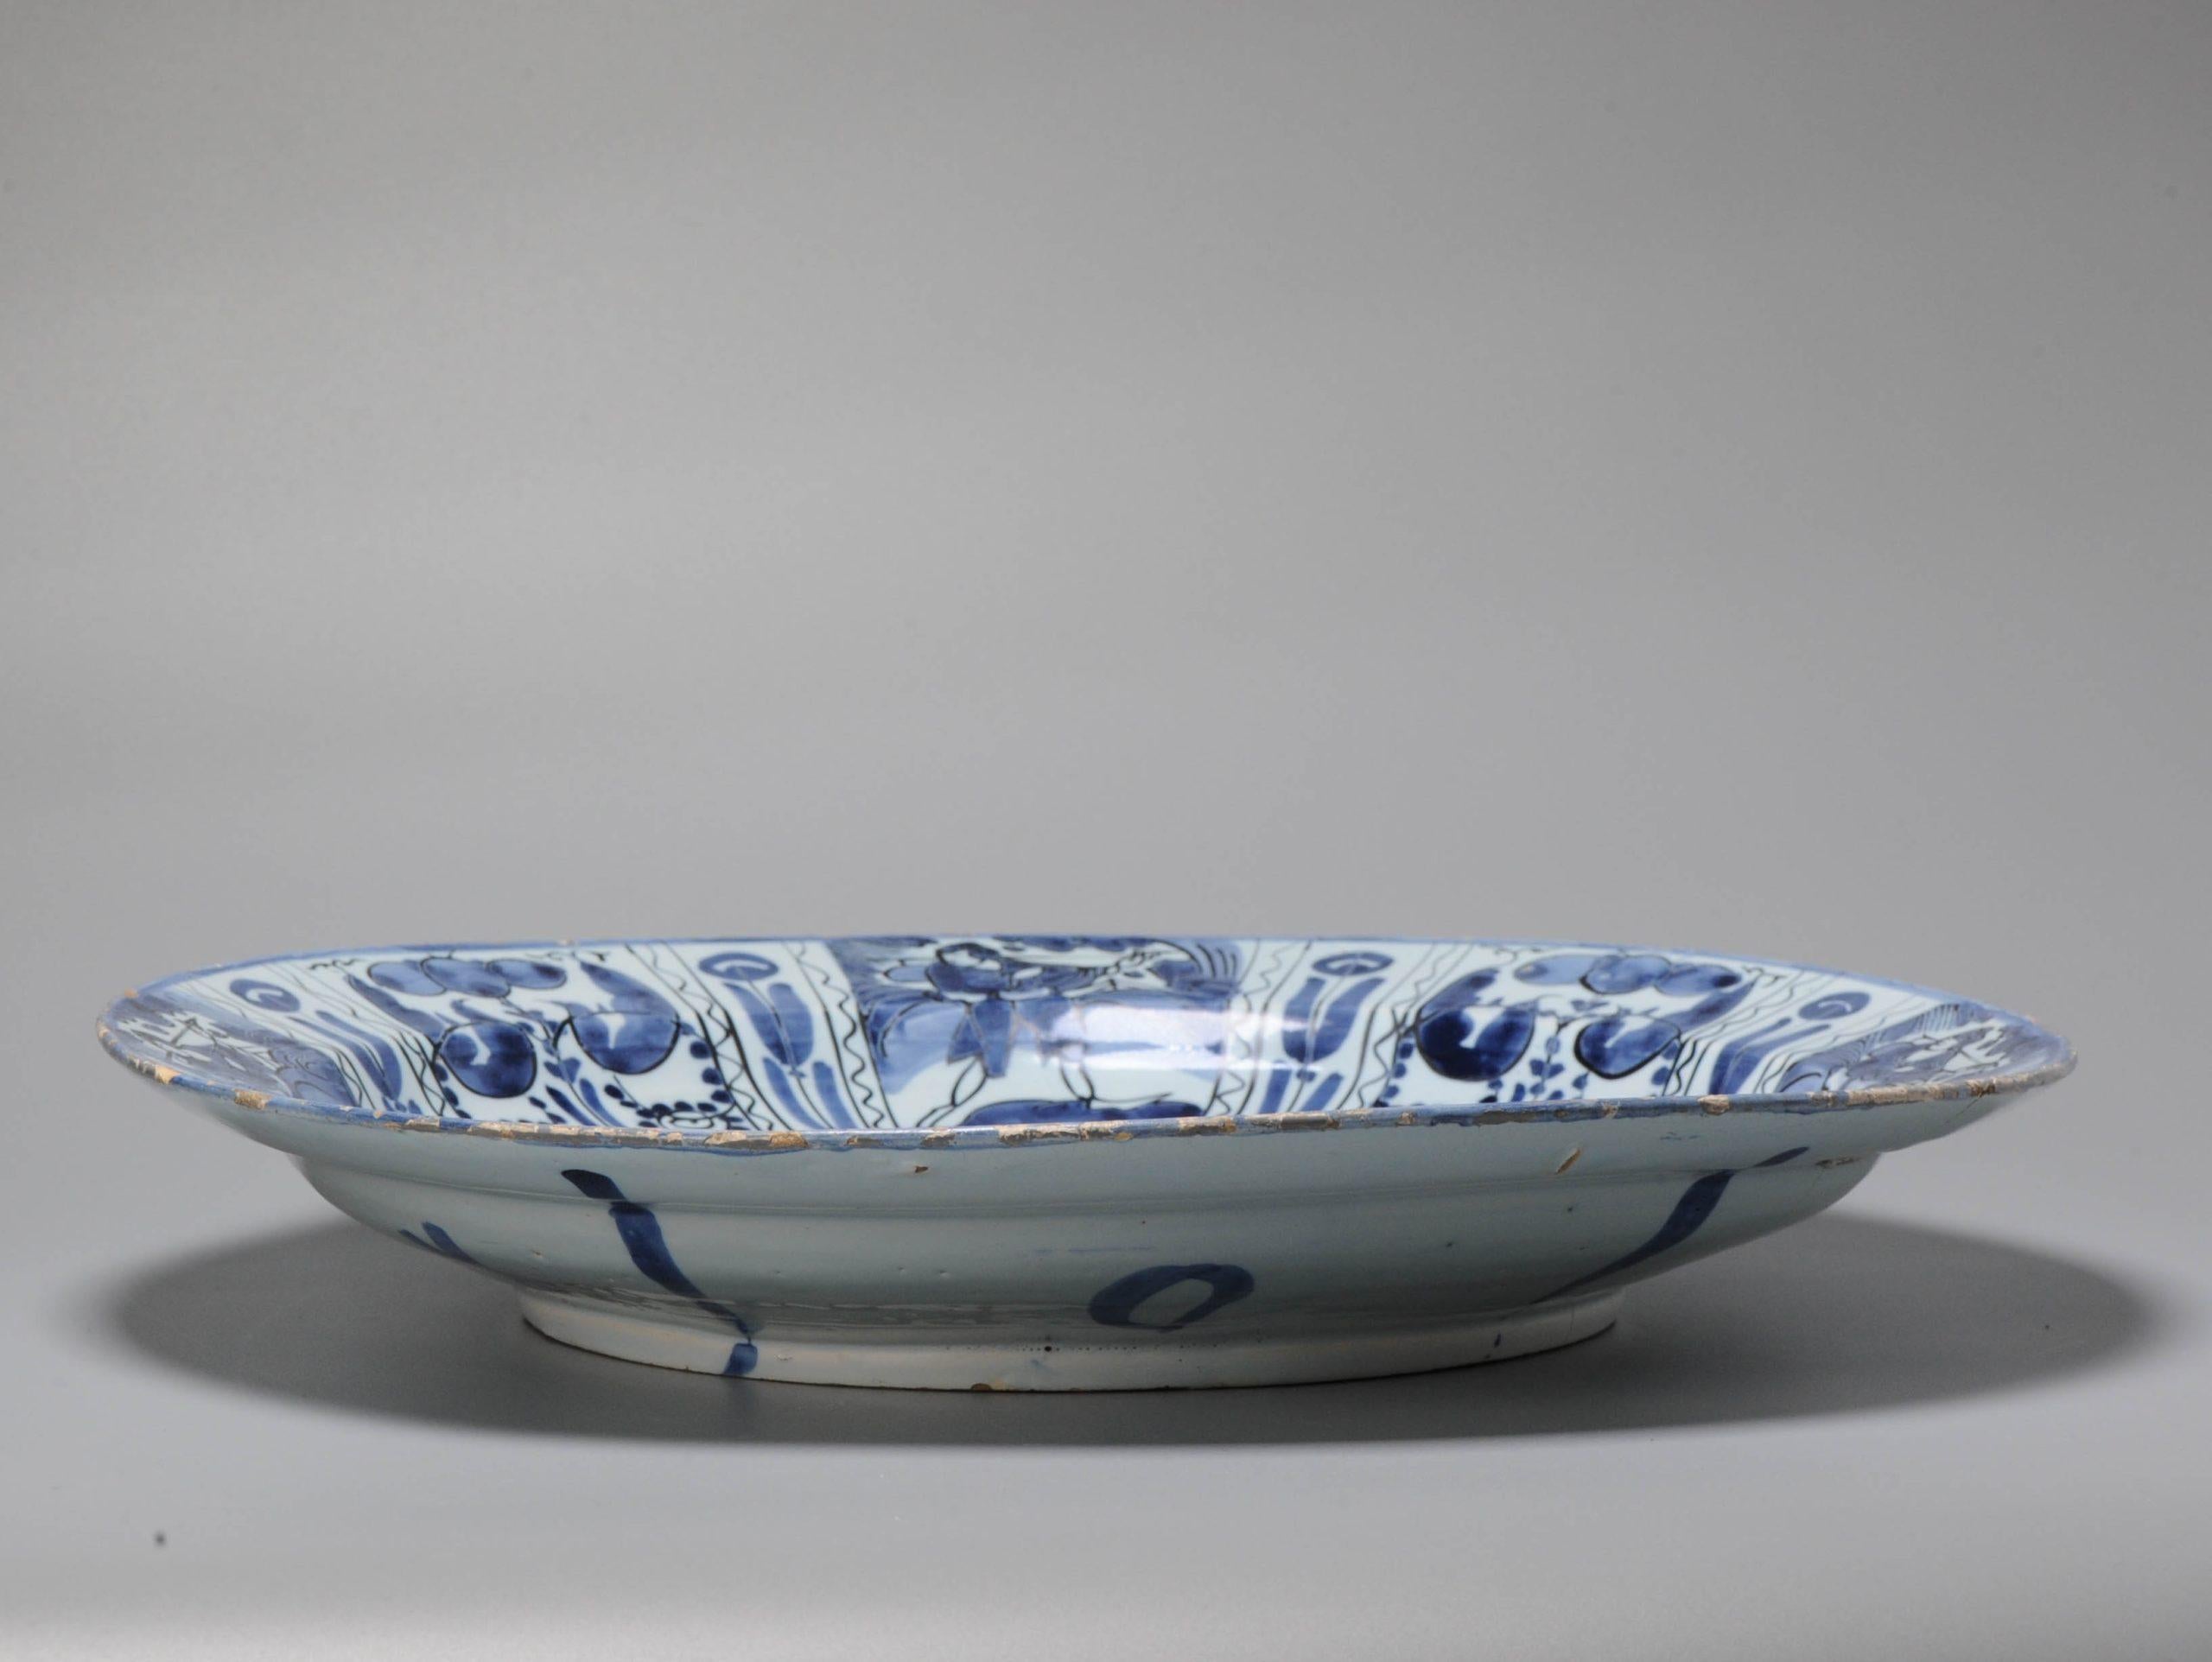 Earthenware dish on footring. flat rim. Decorated in different shades of blue on a white tin glaze in Chinese Transitional style with the so called 'Lion of Juda' in a garden landscape. Flower scrolls replace the diaper motif as a border around the